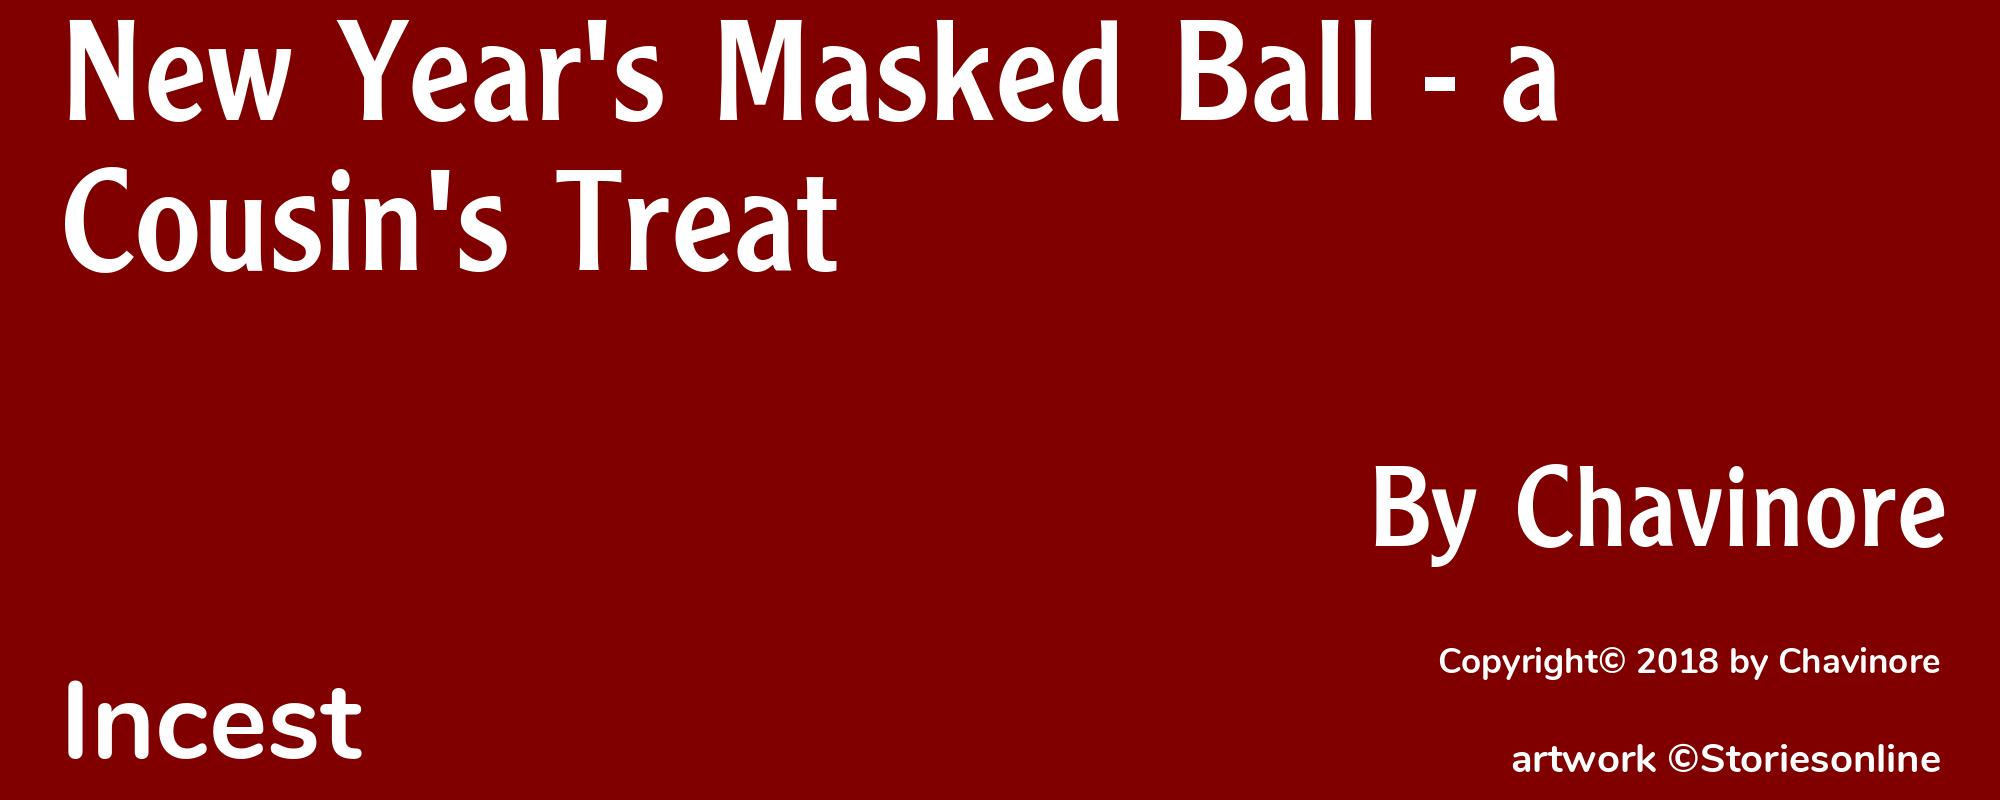 New Year's Masked Ball - a Cousin's Treat - Cover